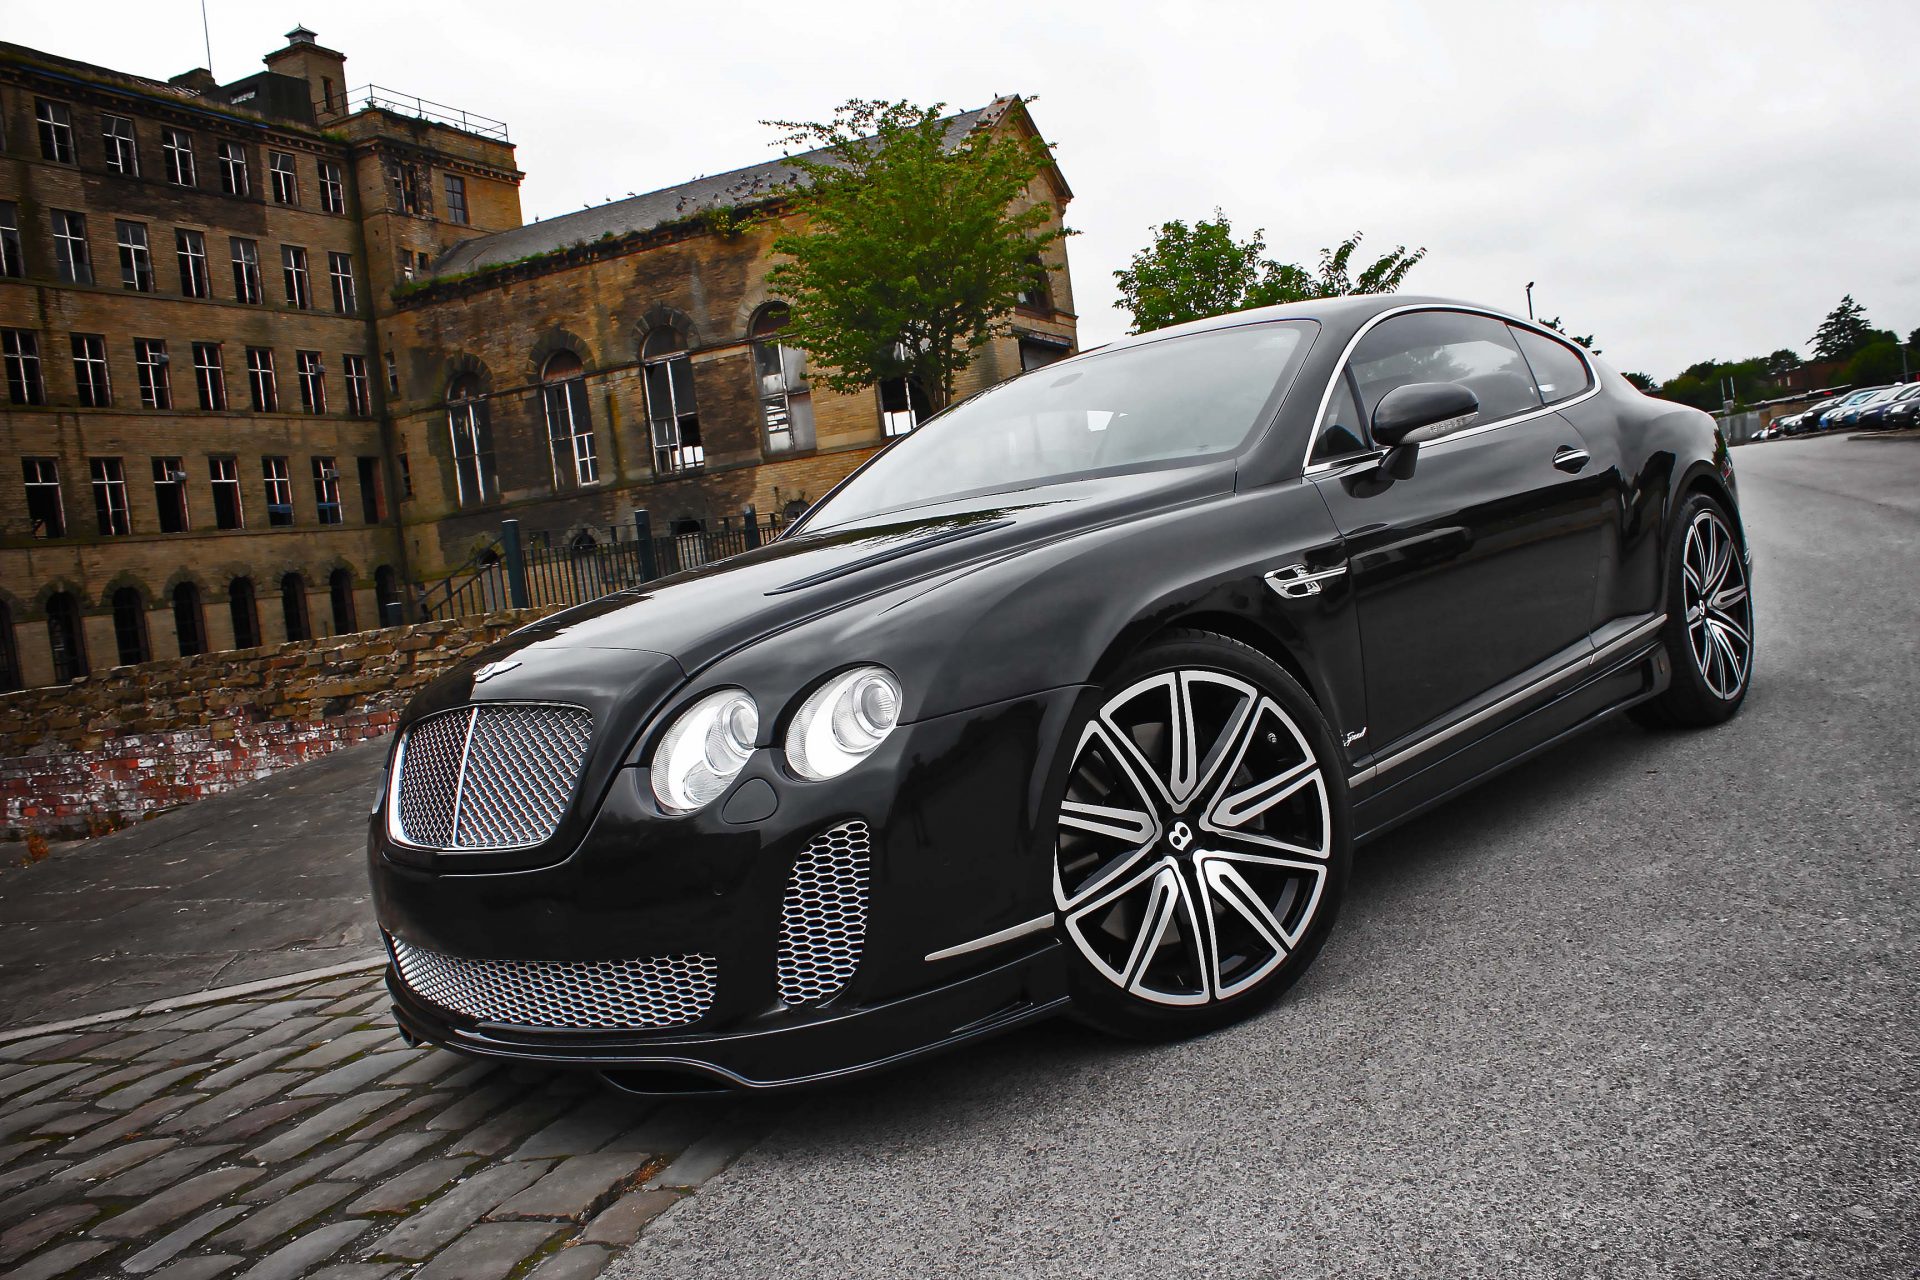 Basic body kit for Bentley Continental GT